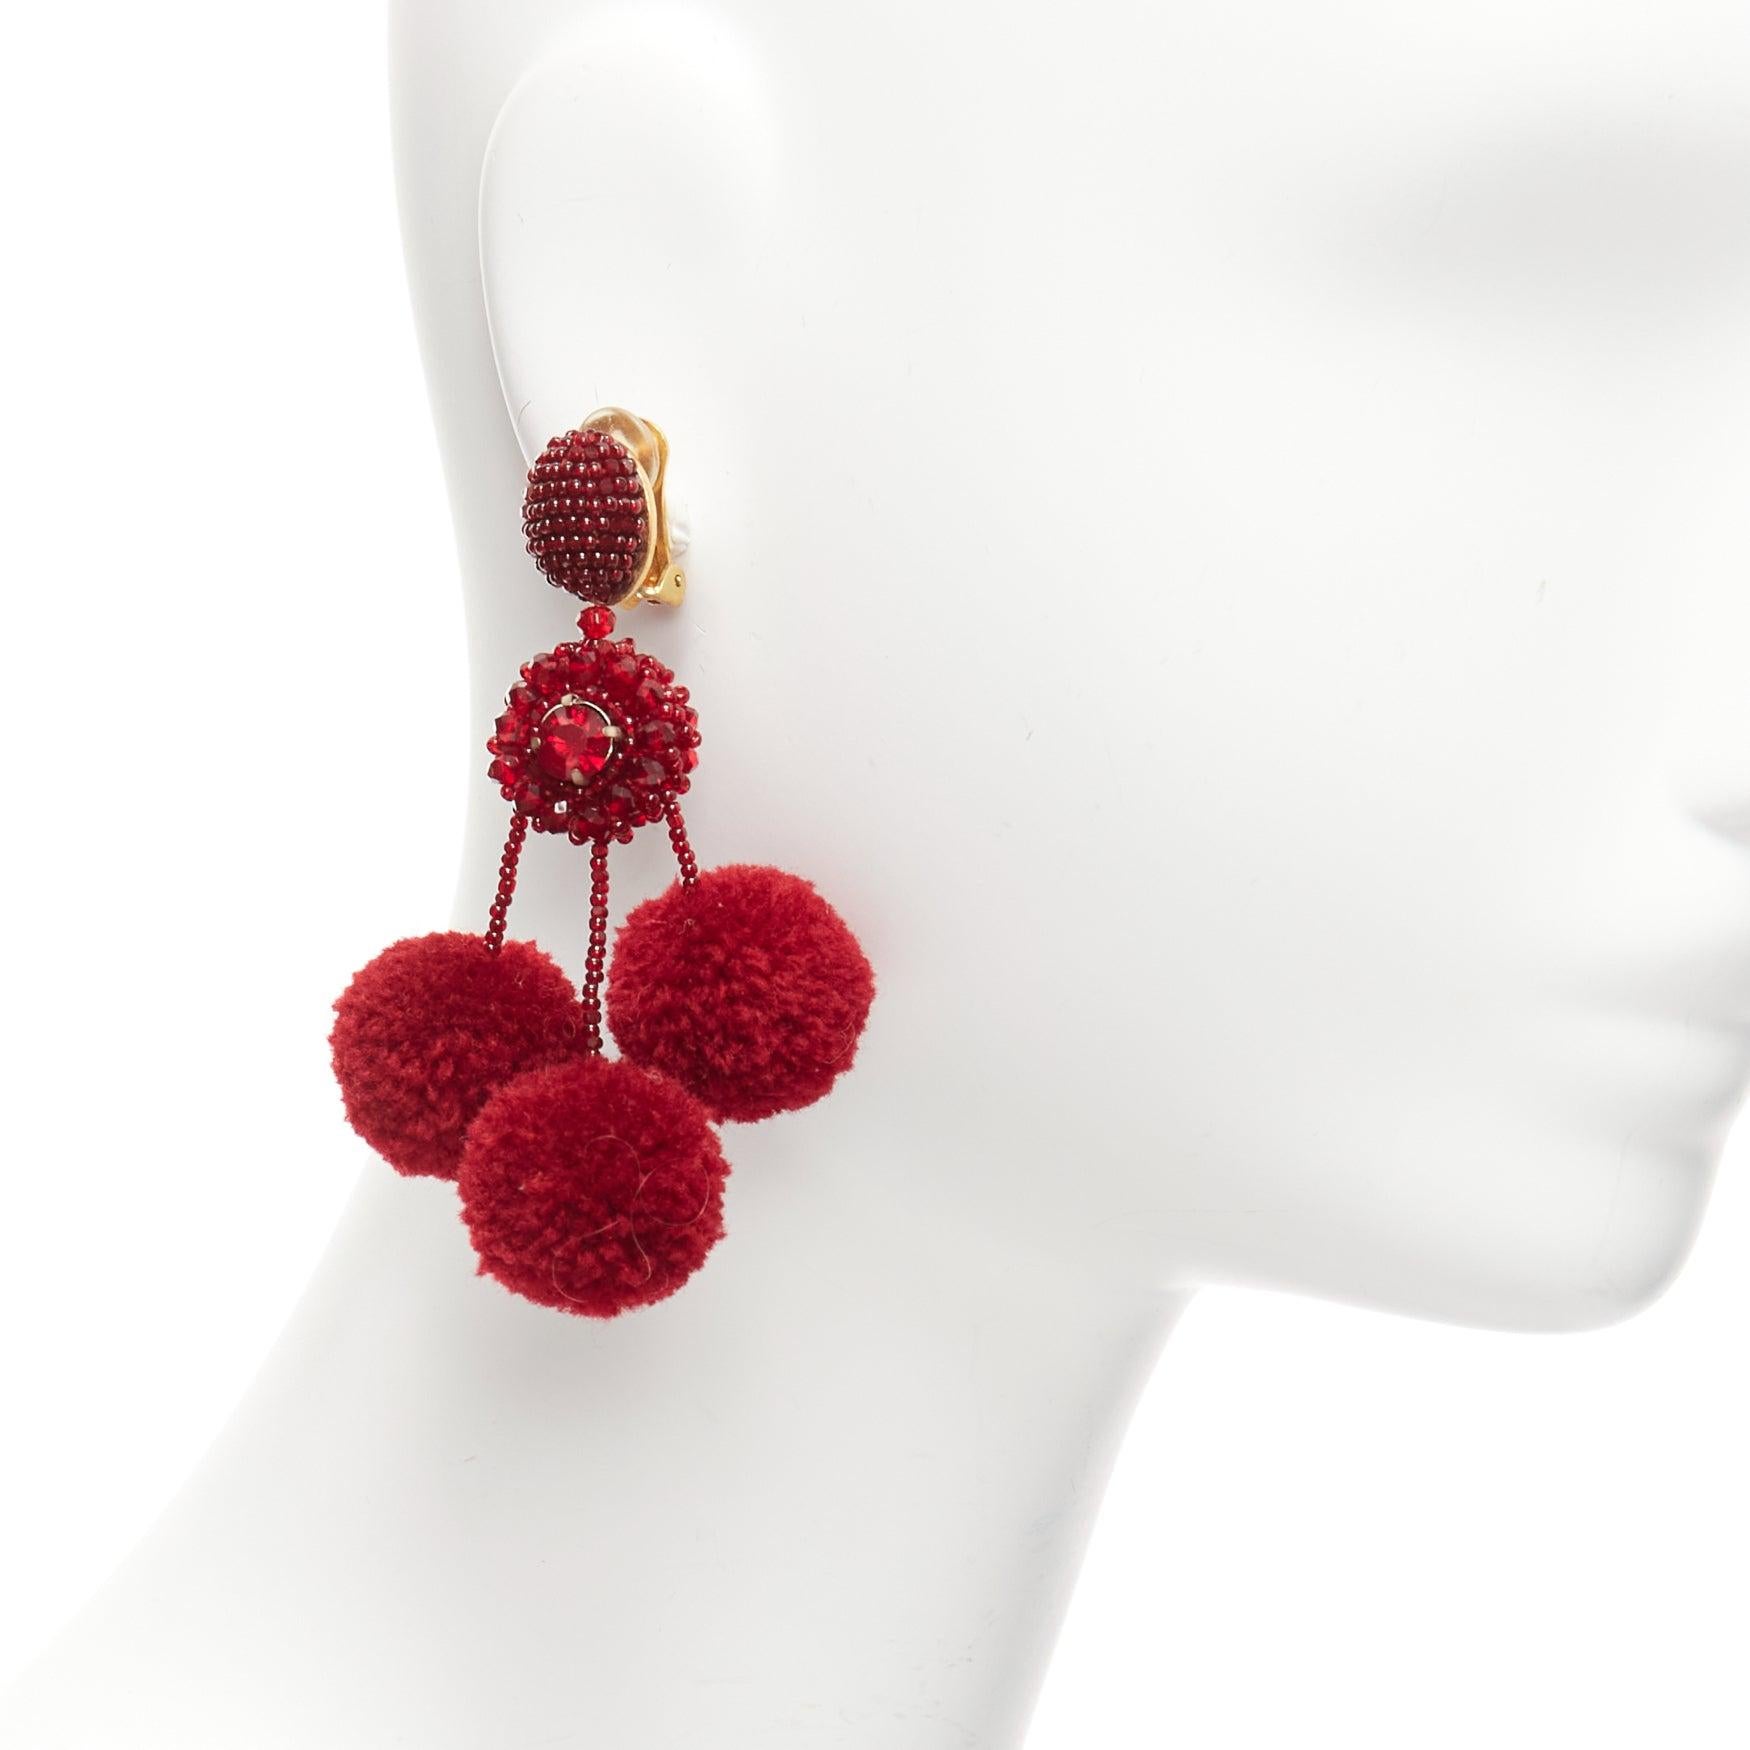 OSCAR DE LA RENTA dark red pompom beads embellished dangling clip on earrings pair
Reference: AAWC/A01048
Brand: Oscar de la Renta
Material: Fabric, Acrylic
Color: Red, Gold
Pattern: Solid
Closure: Clip On
Lining: Gold Metal
Made in: